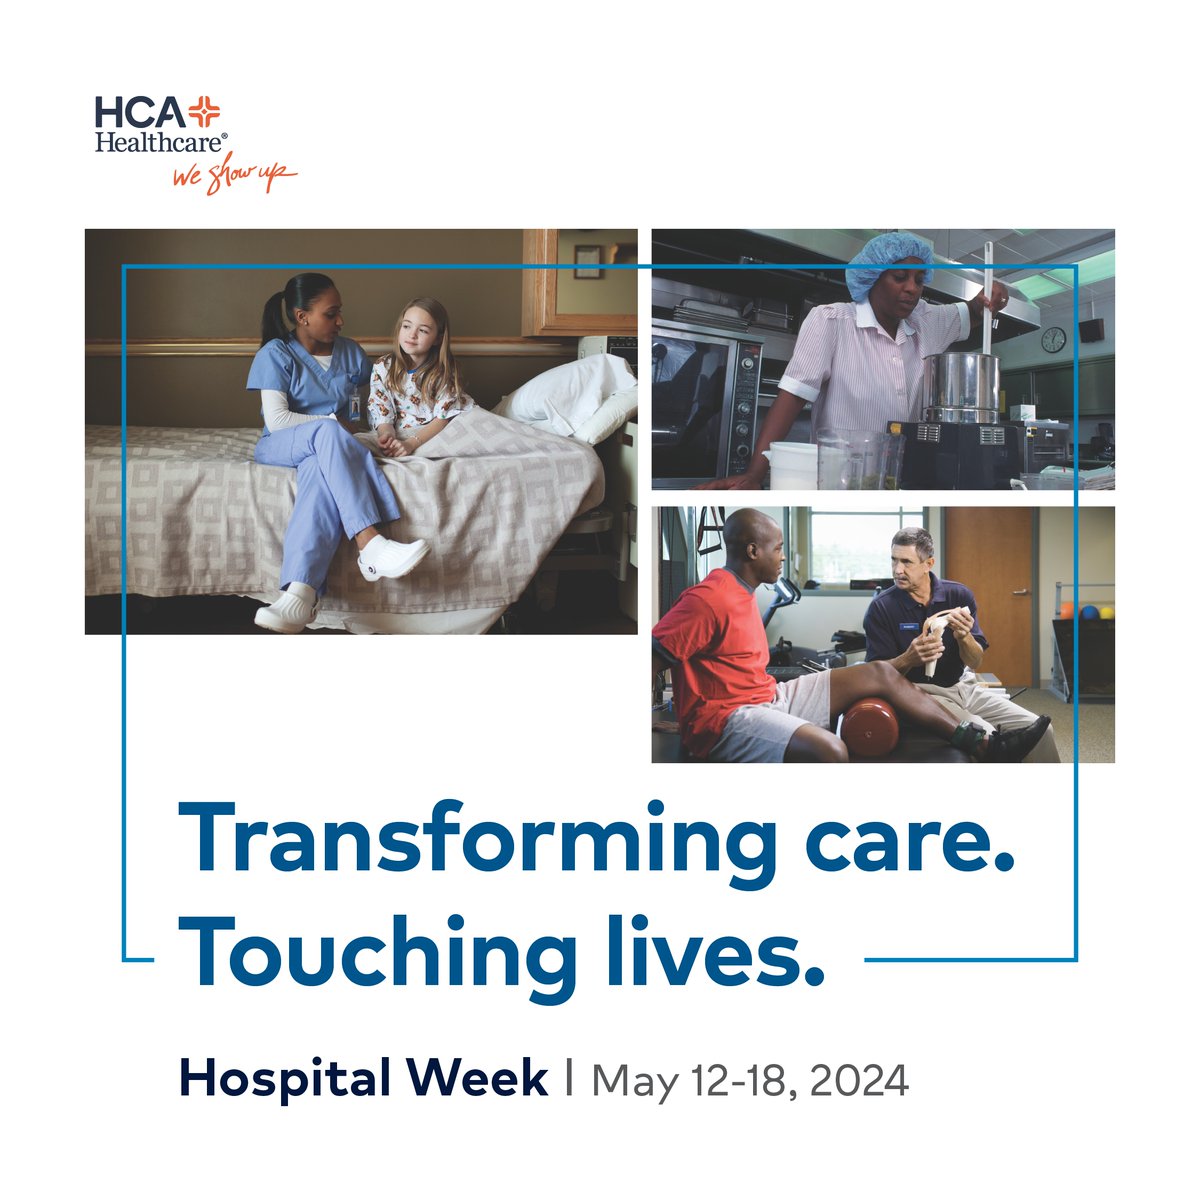 During National #HospitalWeek, HCA Midwest Health is proud to join our larger @HCAHealthcare network to honor each colleague who makes a positive impact in the lives of our patients and community members each day. Thank you for transforming care and touching lives.